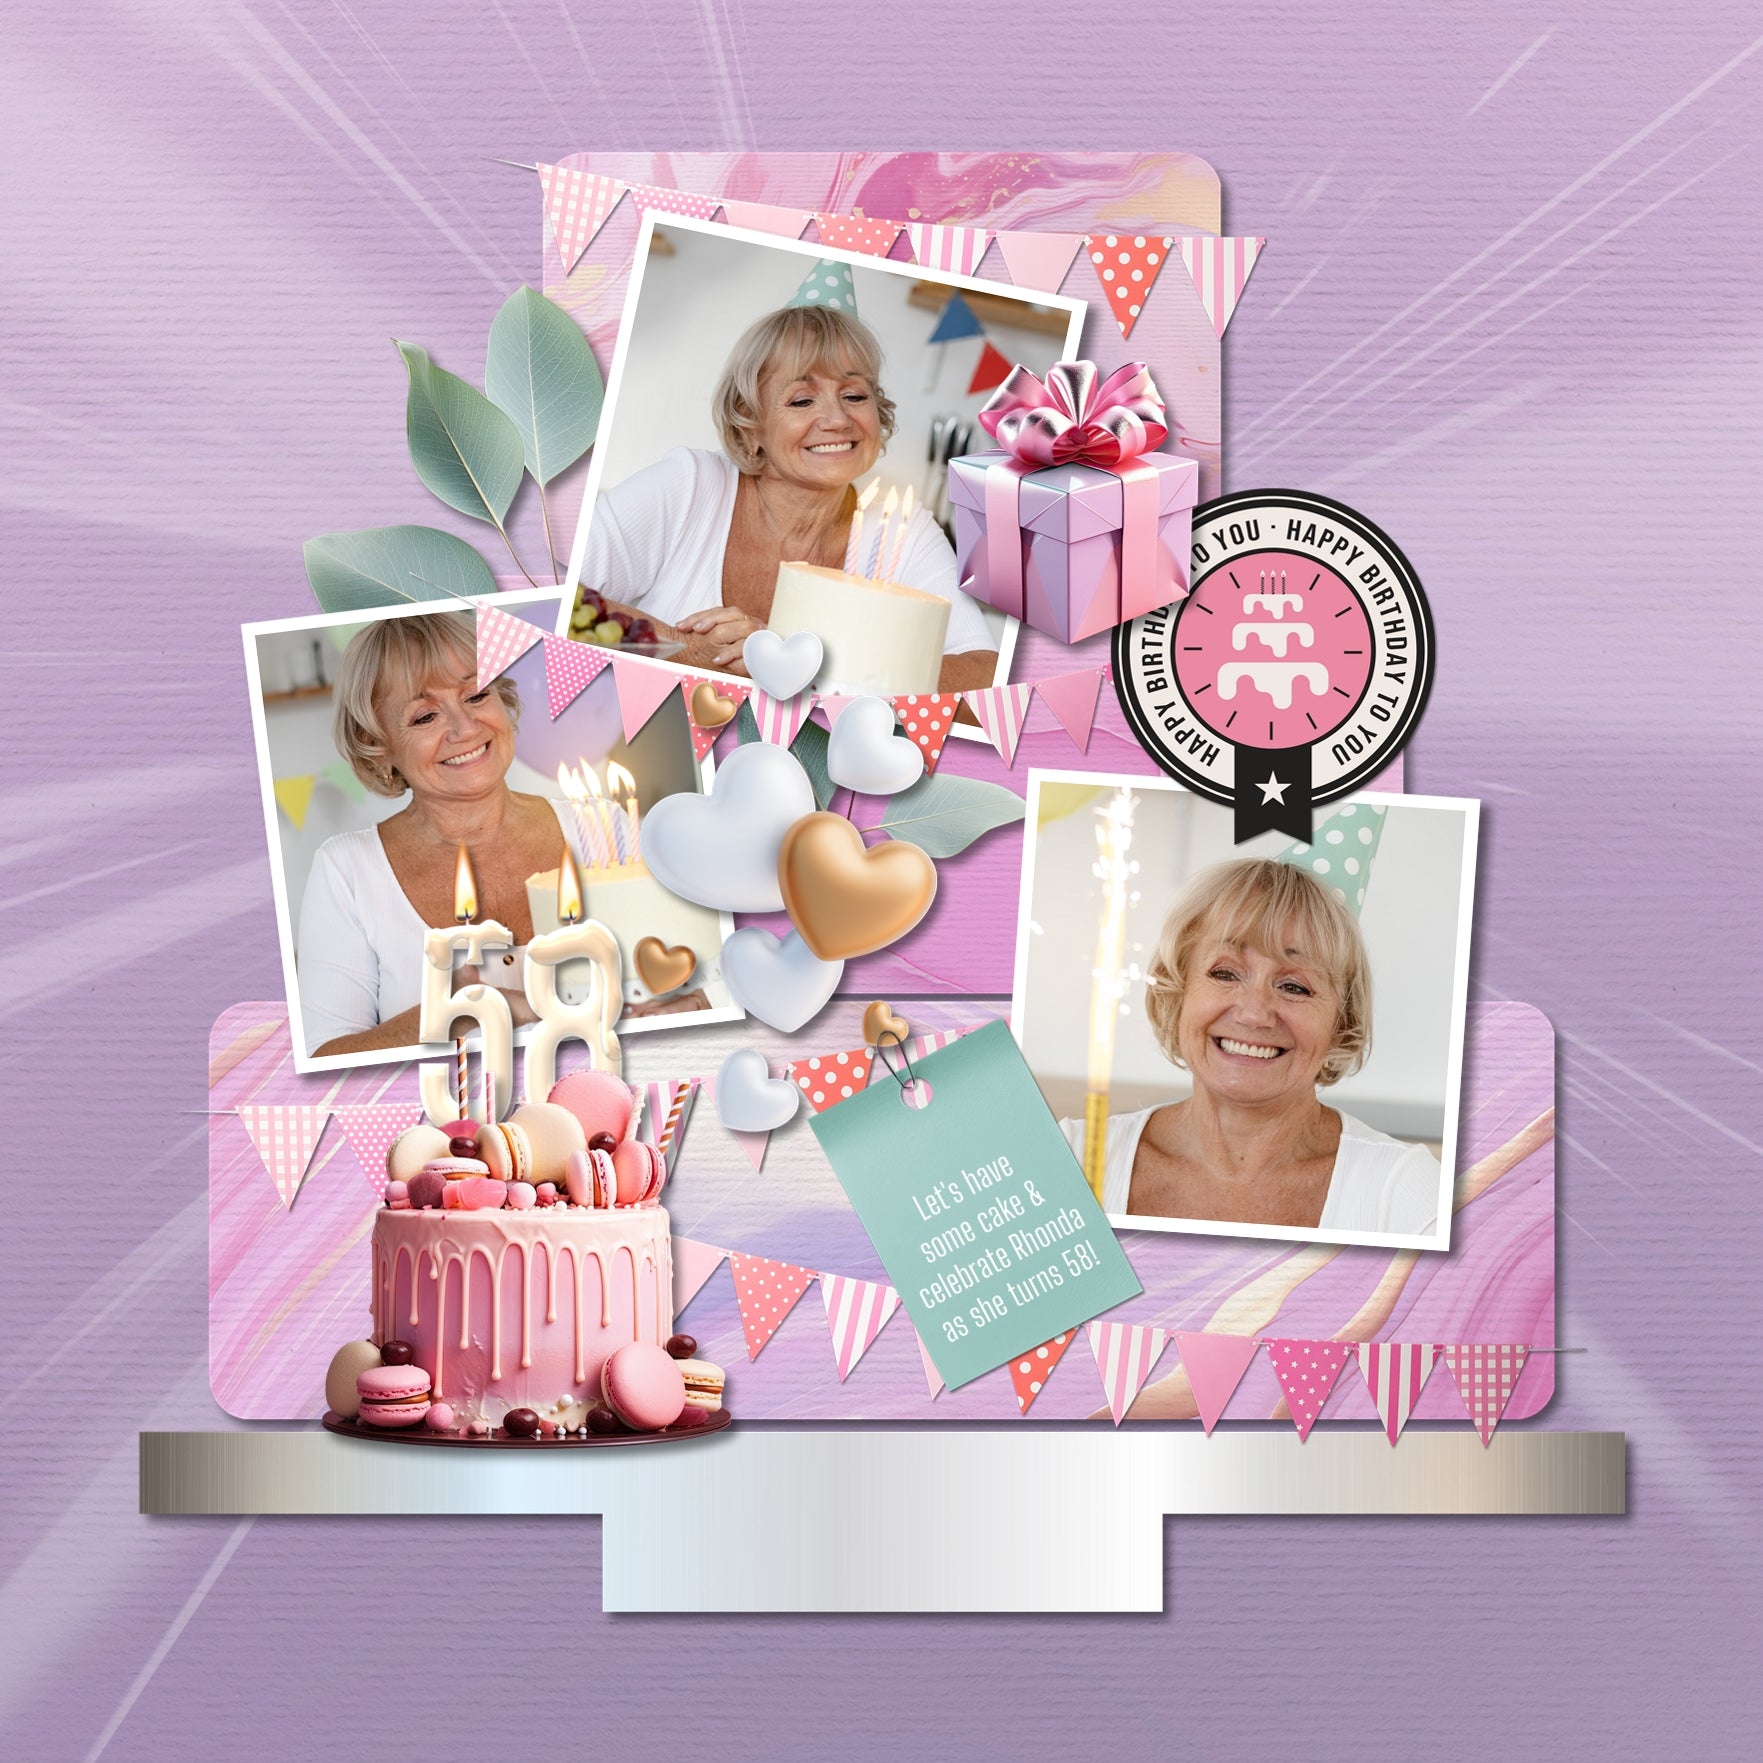 Enjoy the memories created with your girlfriends as you celebrate your birthdays together. This fun and feminine digital scrapbooking embellishments kit by Lucky Girl Creative Digital Art will help you accent your story and bring a smile to your face as you recall your favorite times together. Great for creating birthday cards and party decor, too! Digital stickers include birthday cake, birthday presents, balloons, cupcakes, and more!